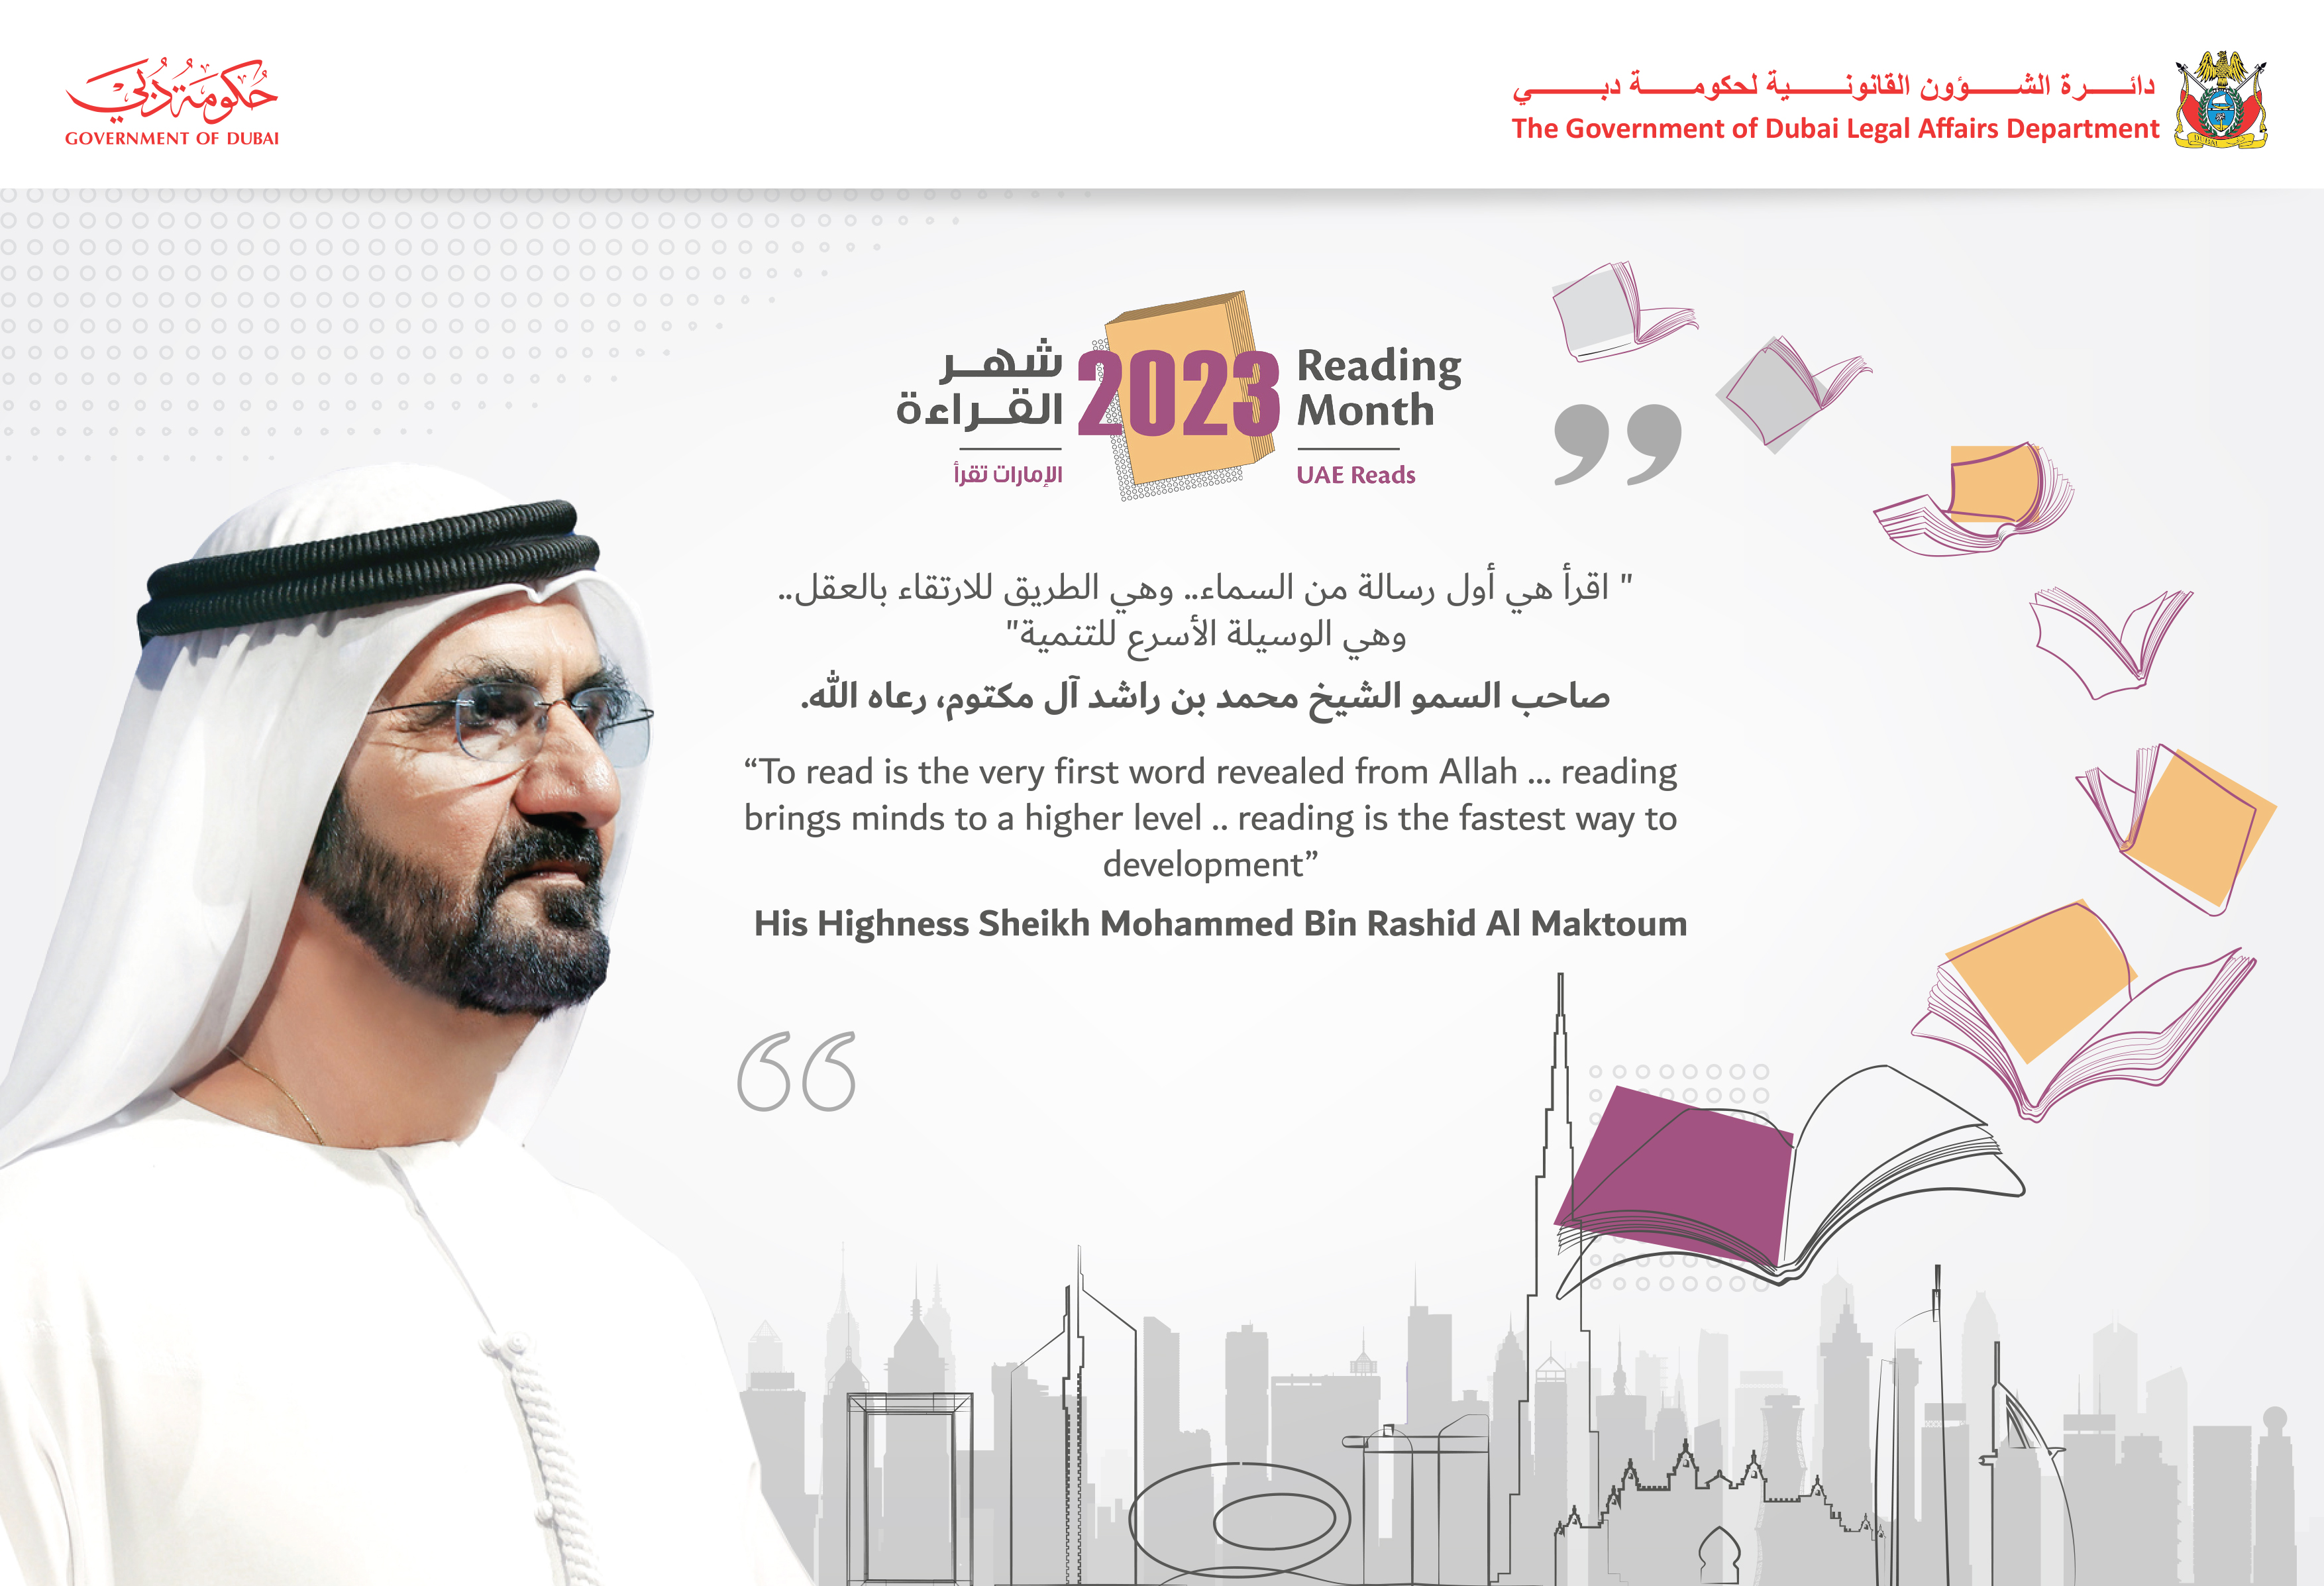 The Government of Dubai Legal Affairs Department concluded its events marking the UAE Reading Month 2023